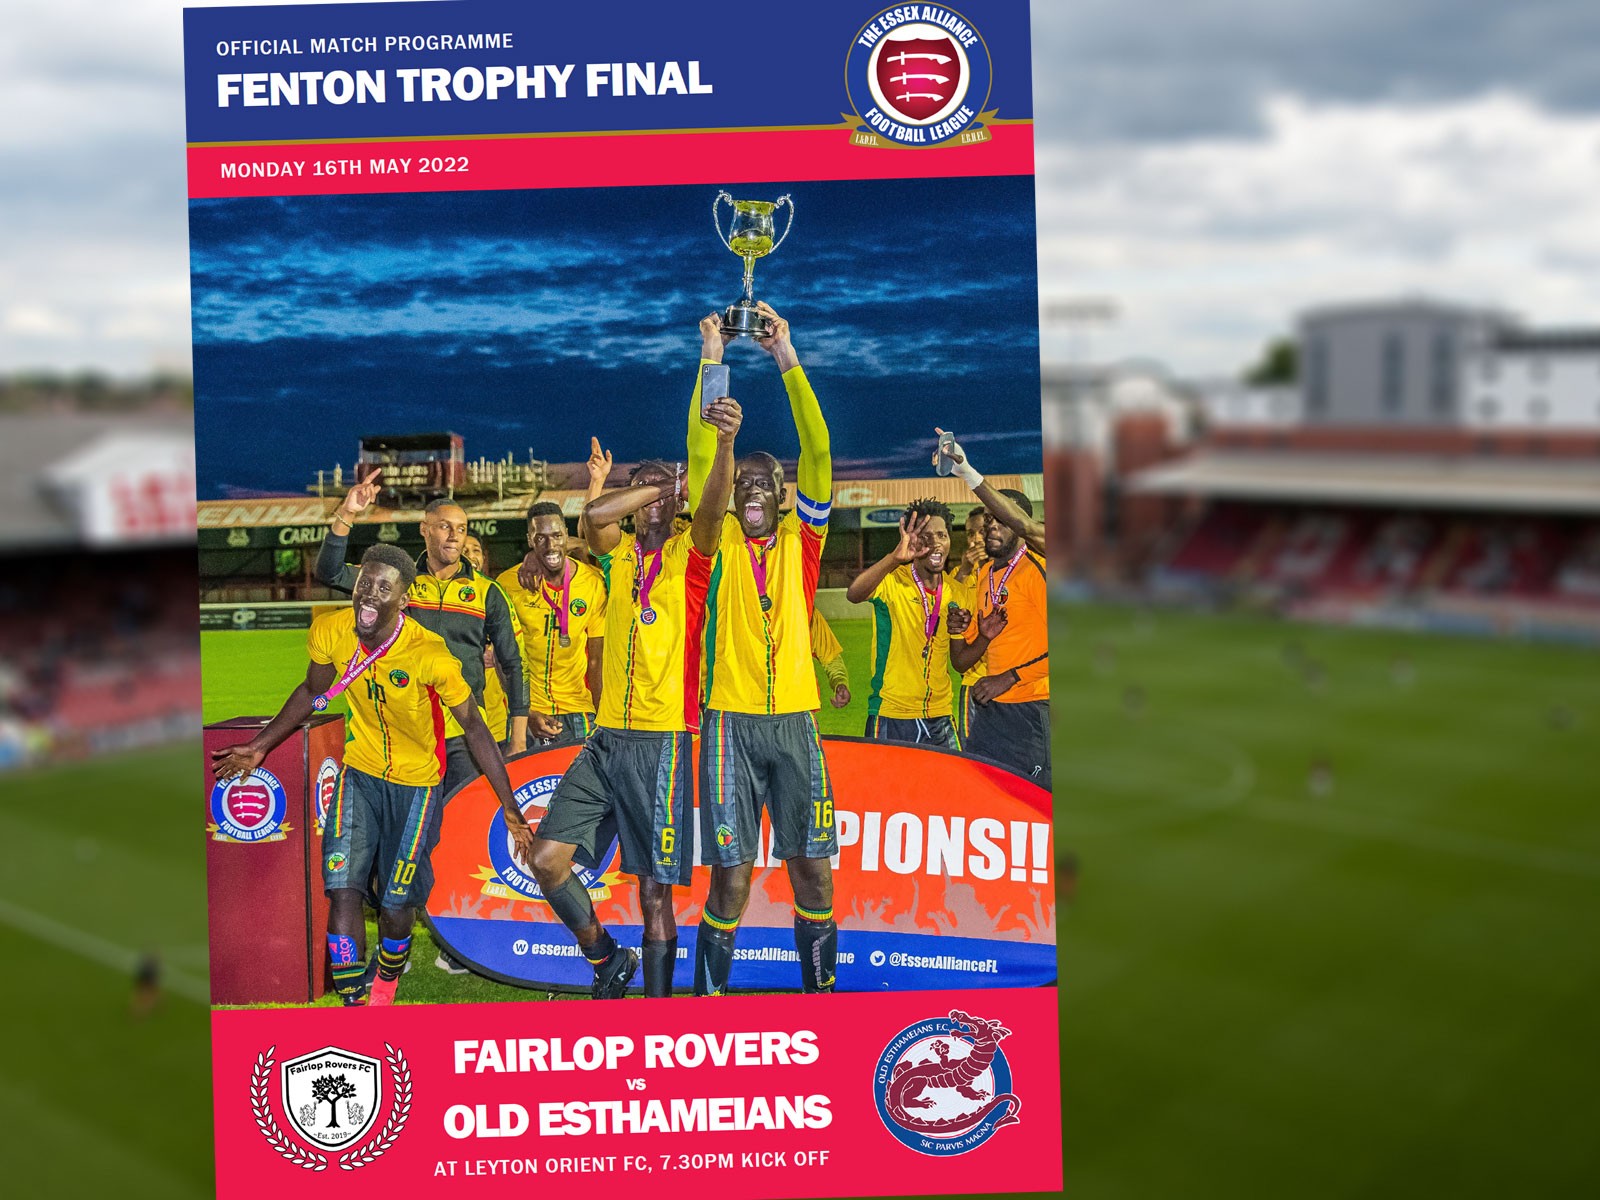 Fairlop Rovers and Old Esthameians in Fenton Trophy Final action this Monday